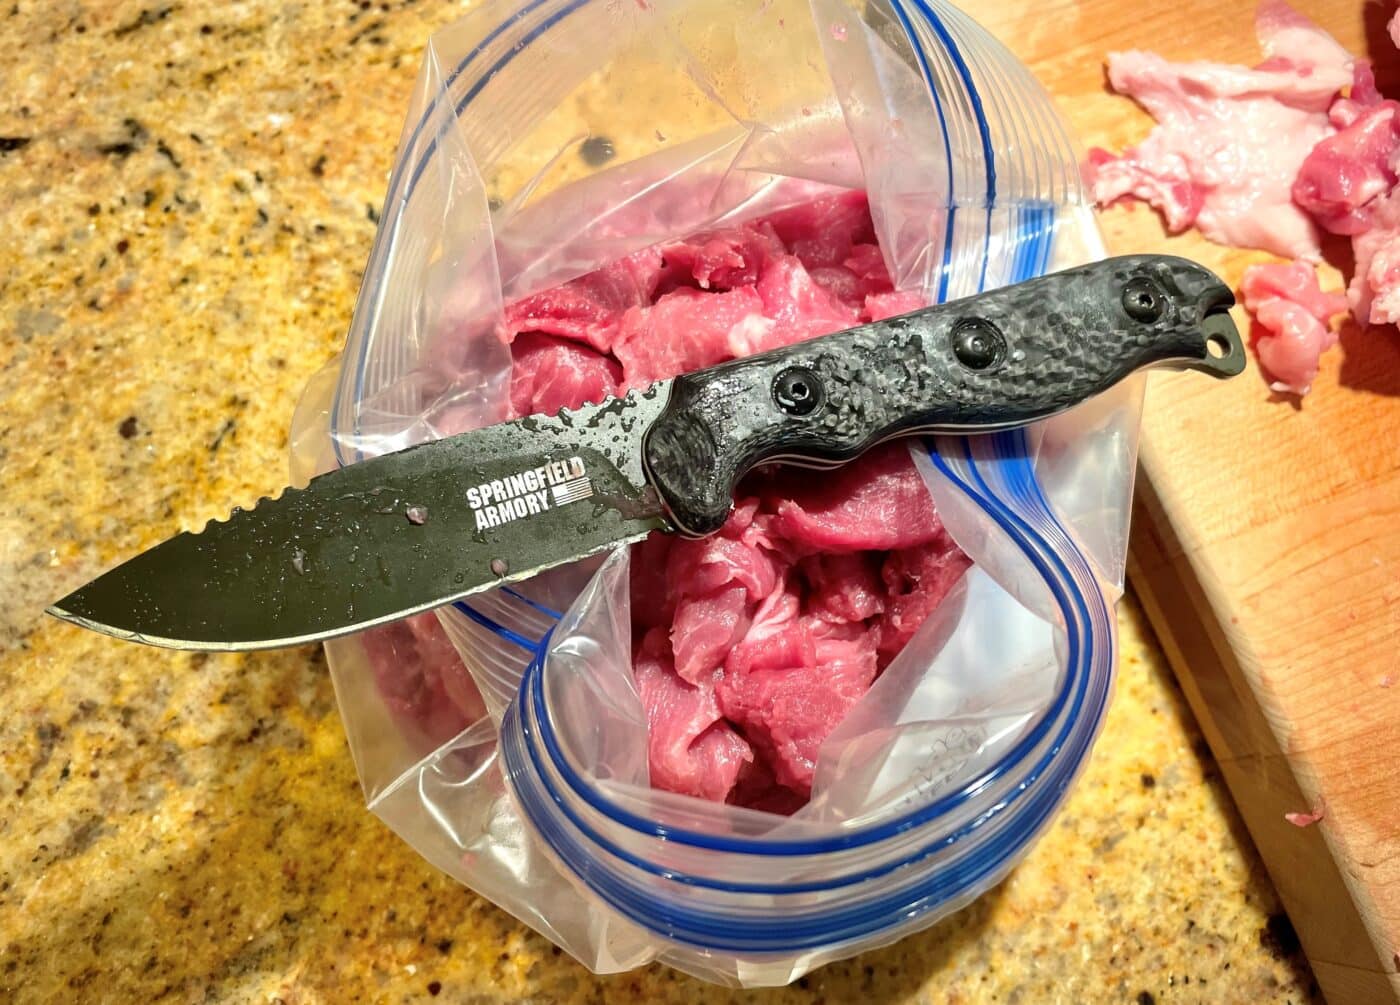 using the model 2020 knife to butcher meat